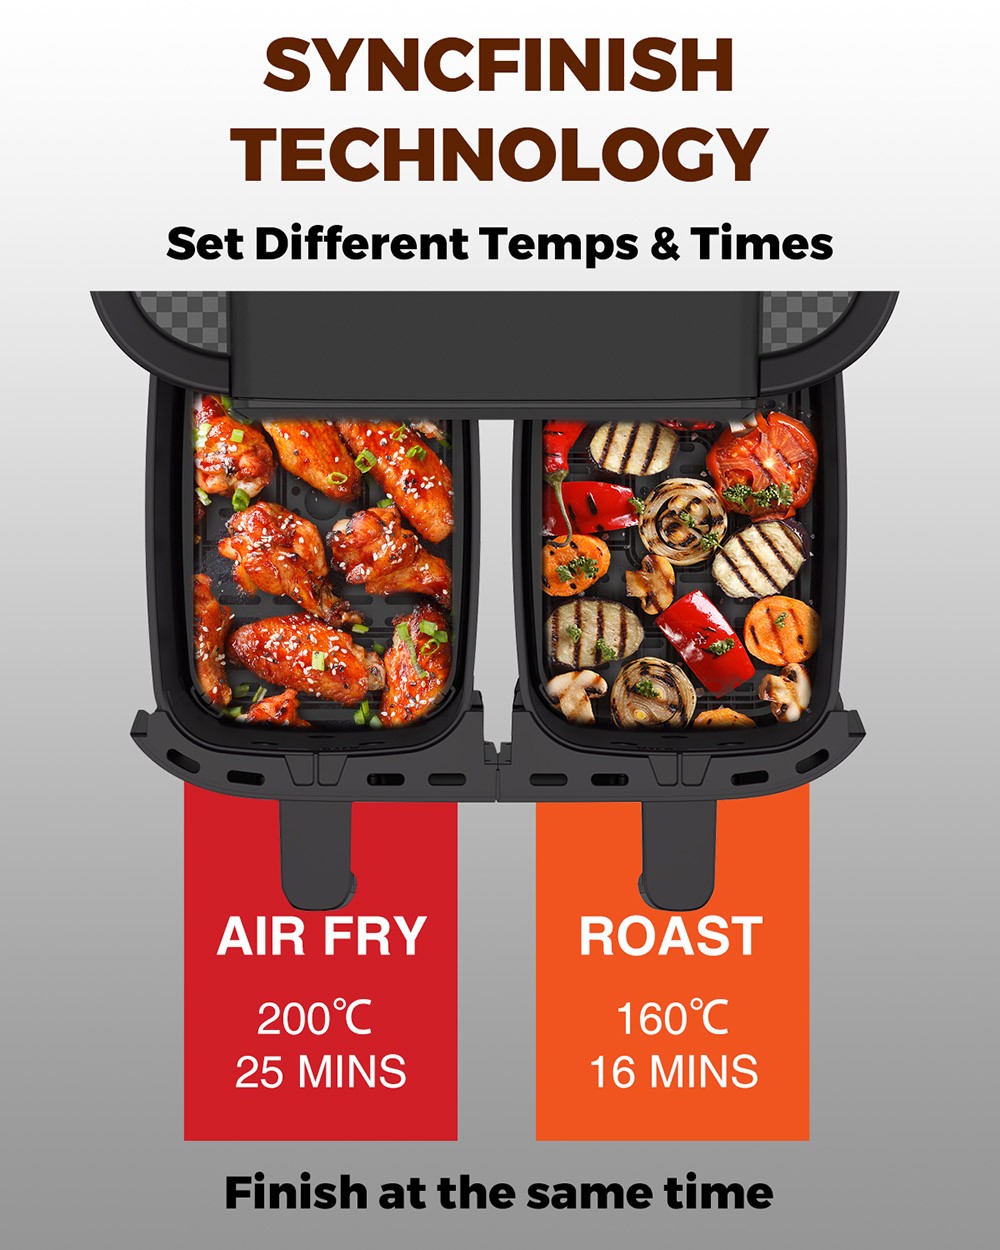 JOYAMI 1800W Air Fryer with 2 Baskets, Dual Zone, 7.6L/8QT Capacity, Sync-Finish Function, 6 Presets Touchscreen, Nonstick and Dishwasher Safe